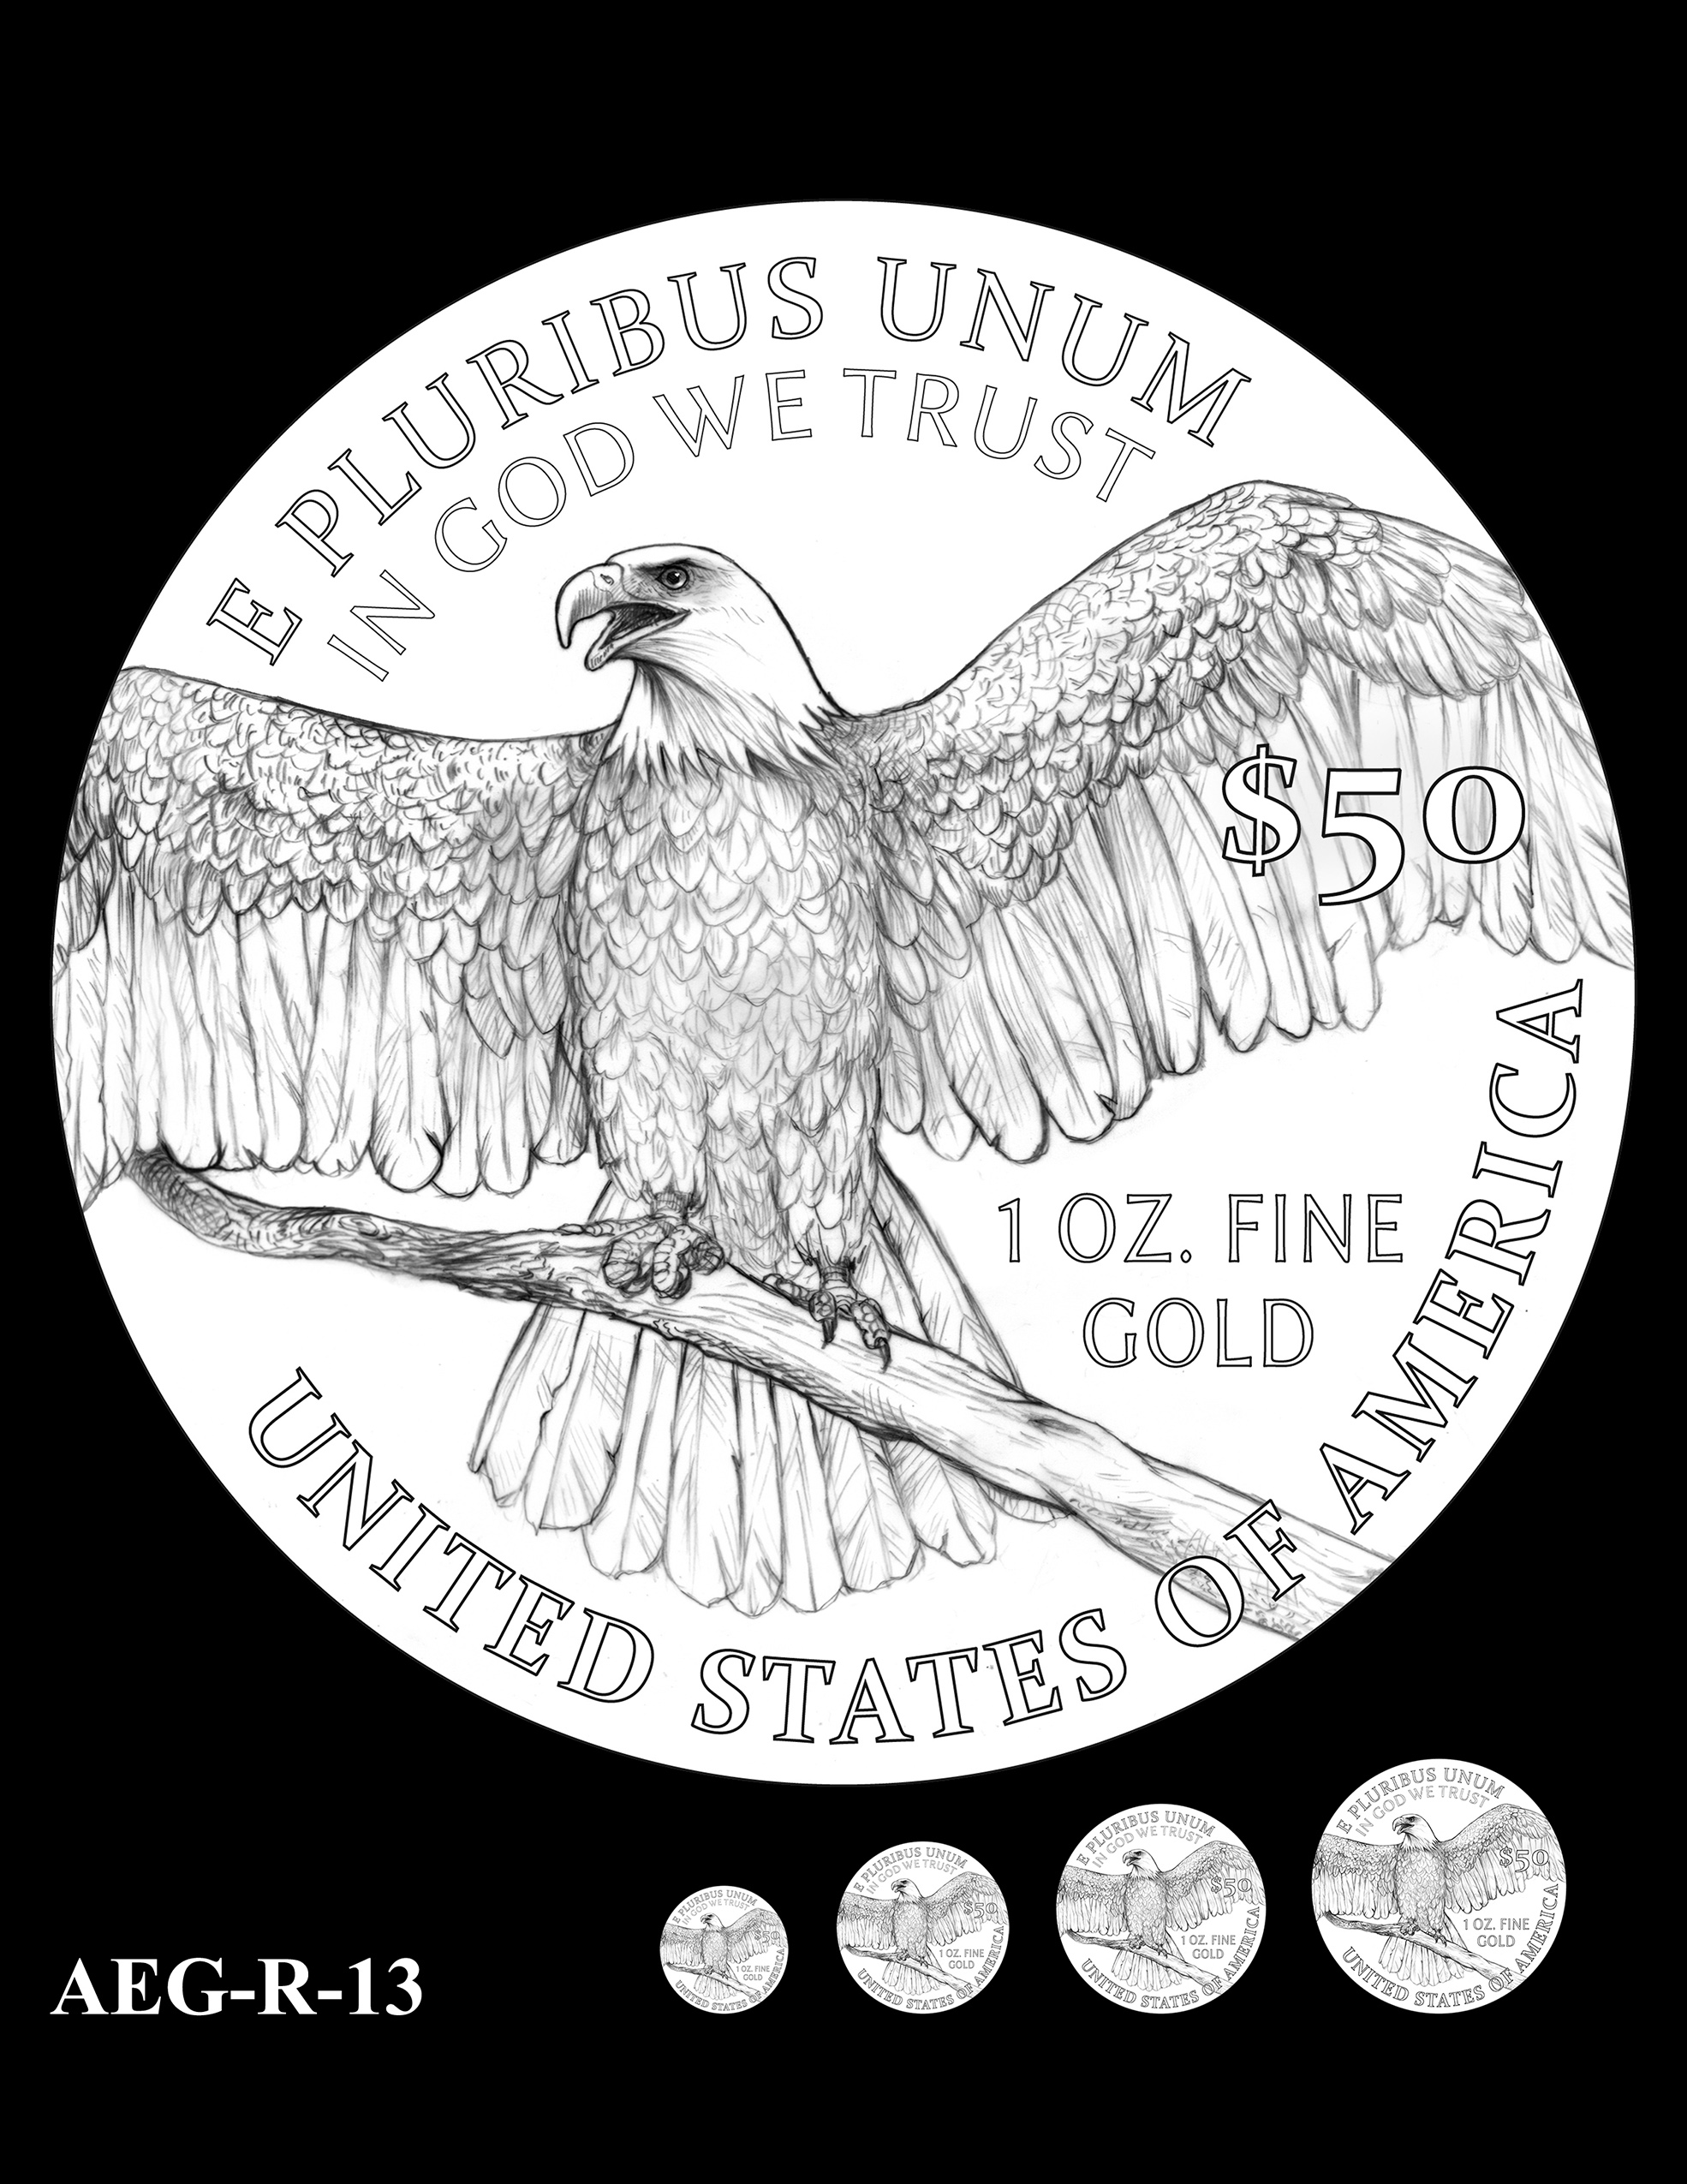 AEG-R-13 -- American Eagle Proof and Bullion Gold Coin - Reverse